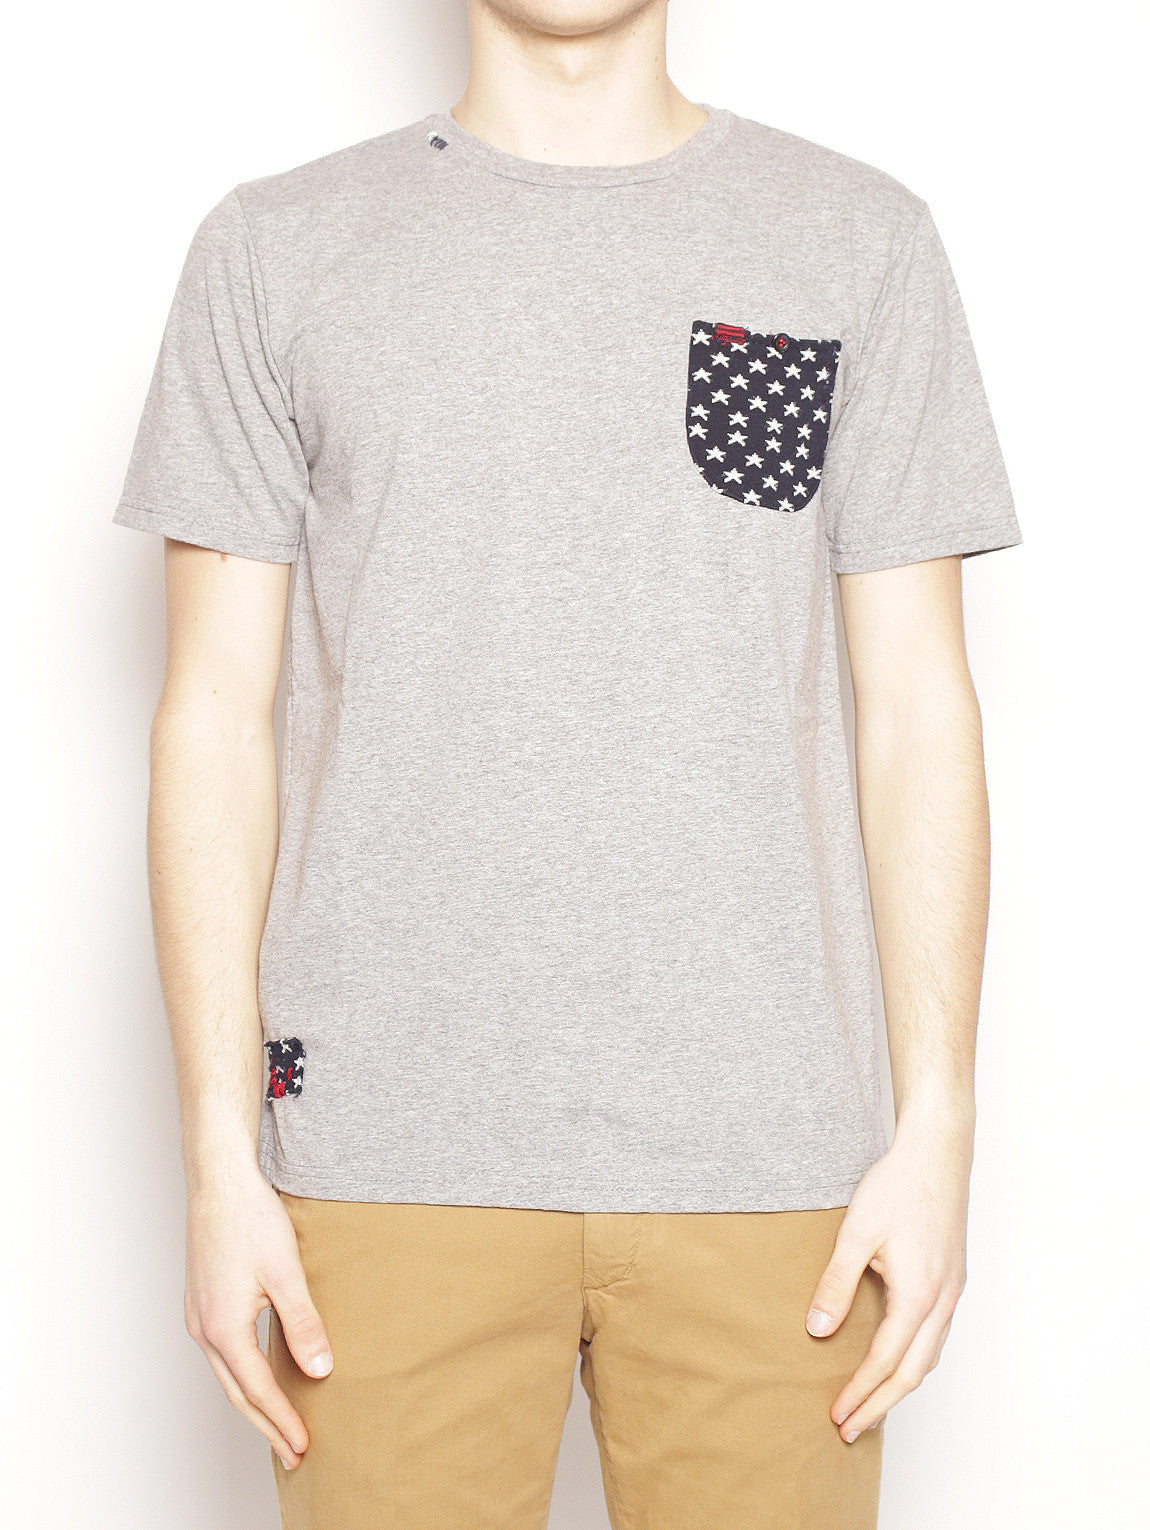 IN THE BOX-T-shir Classic Pocket Grey Melange-TRYME Shop